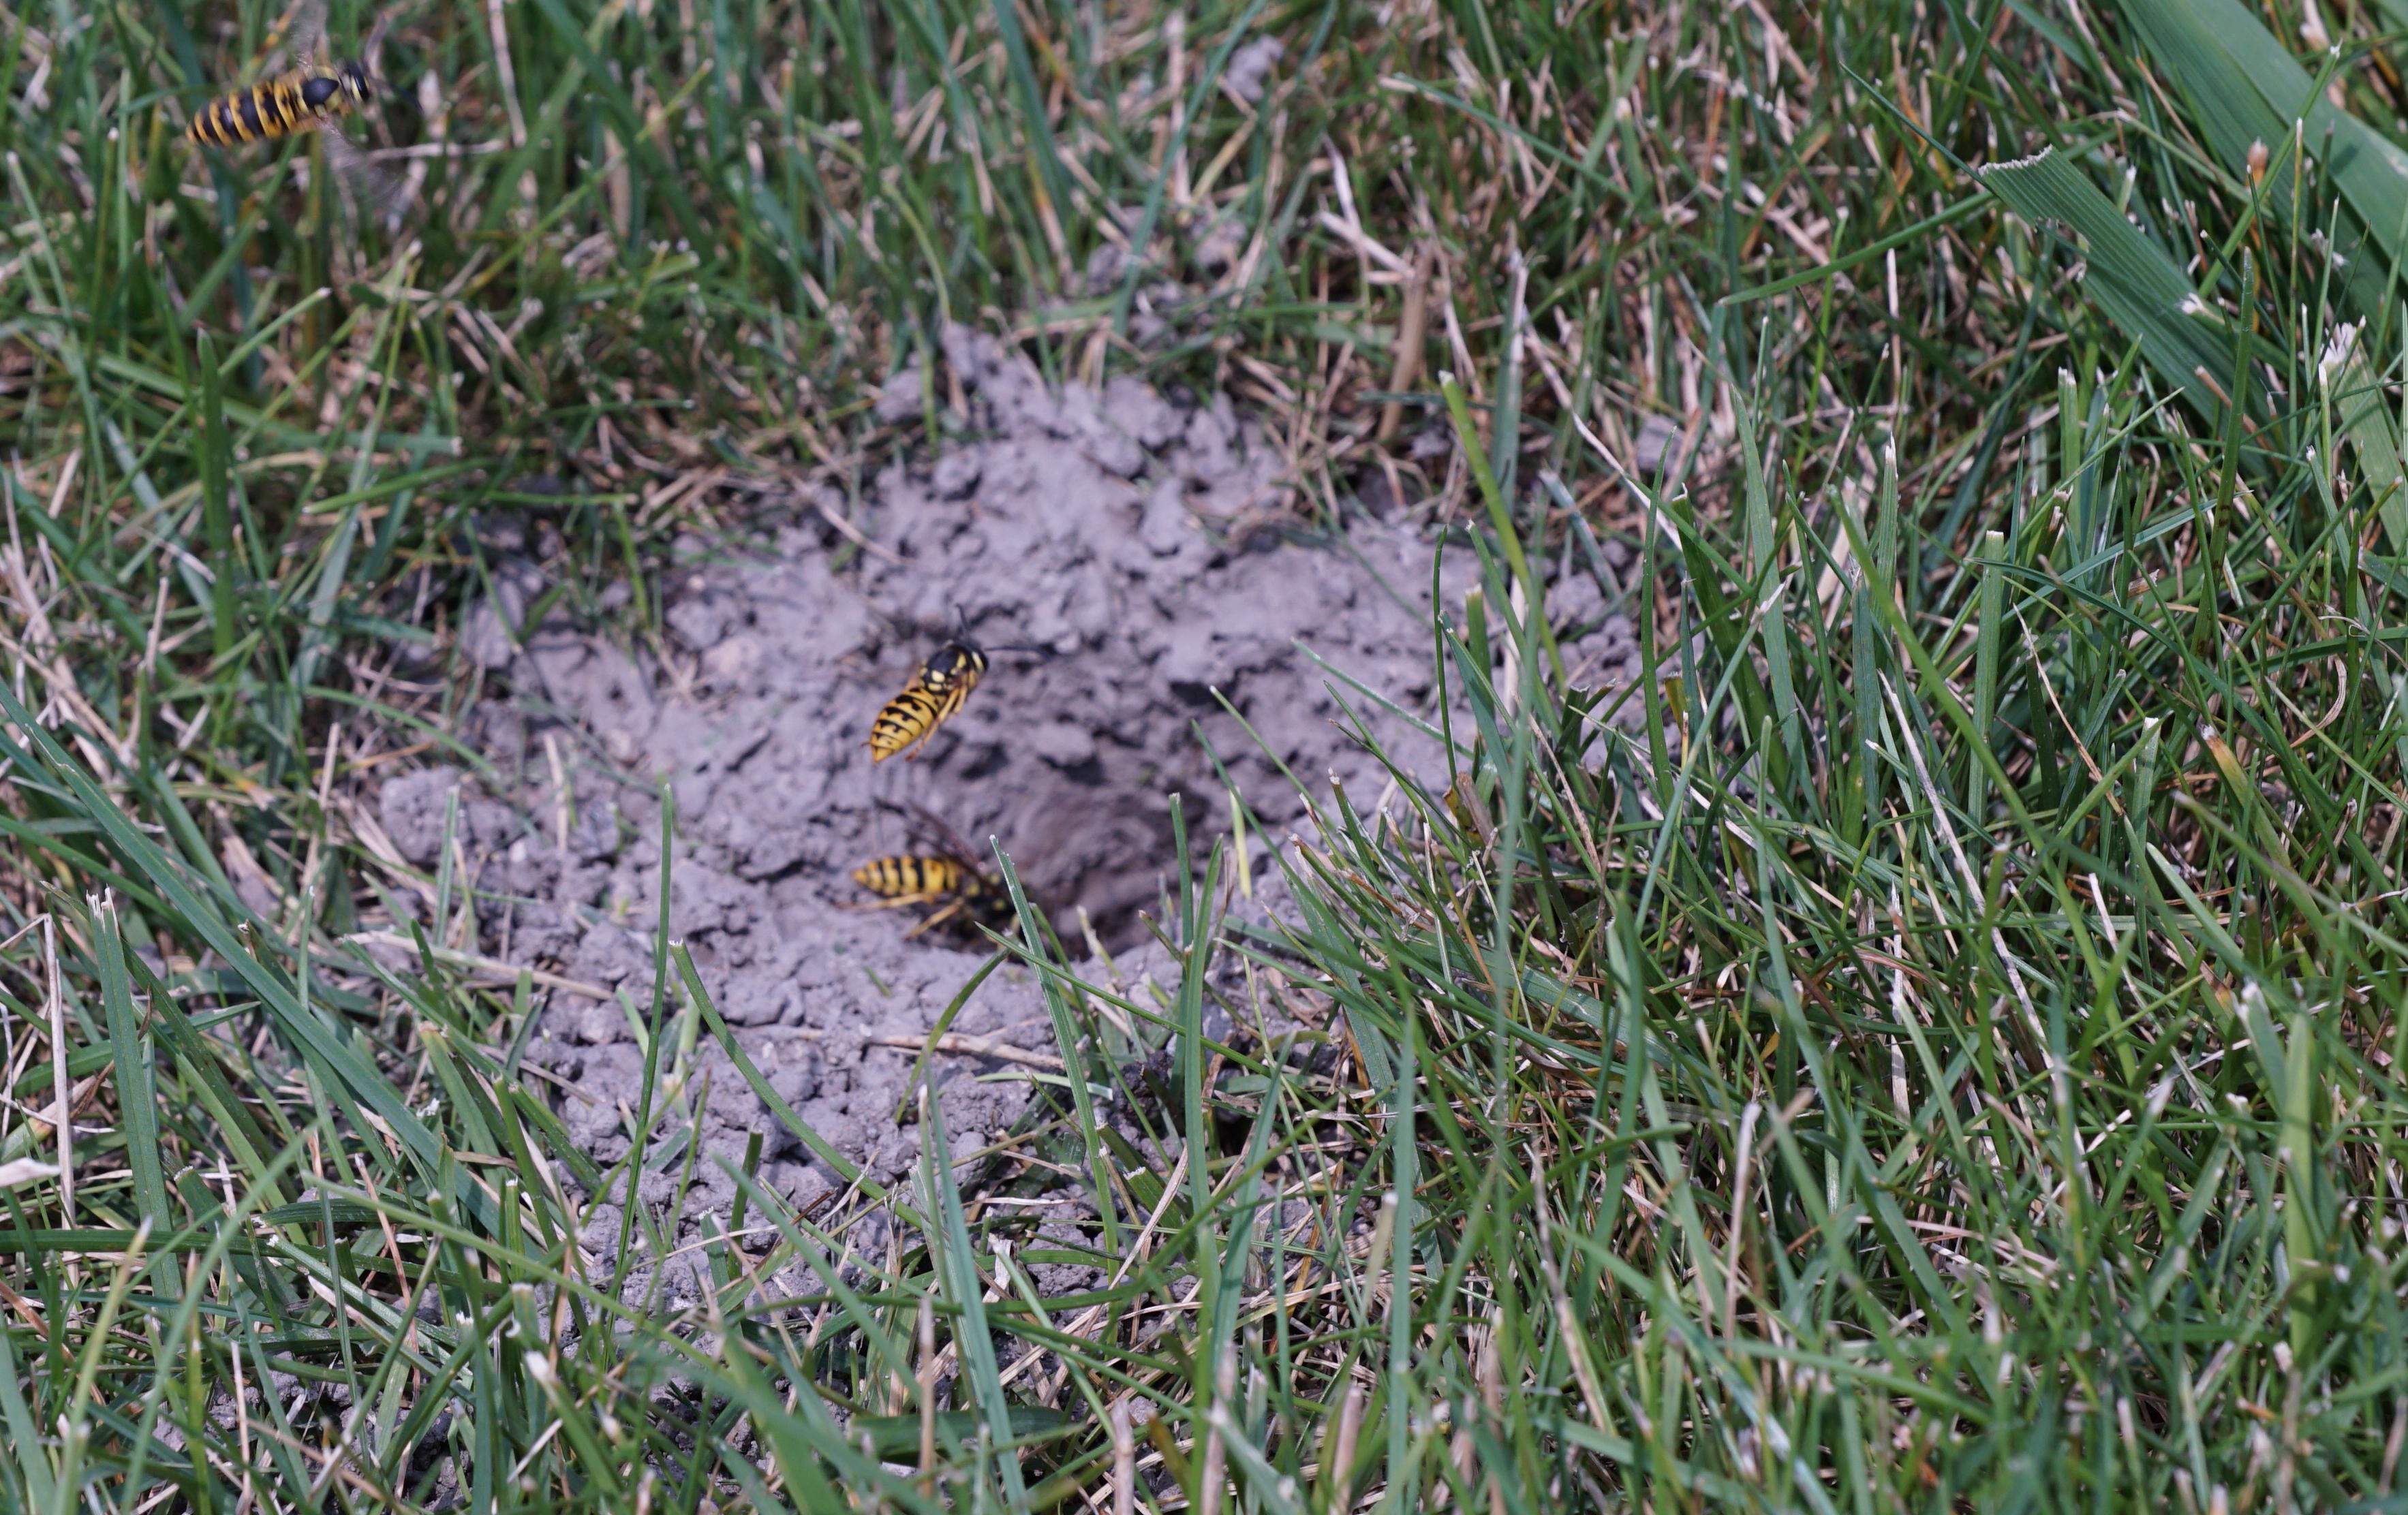 A yellow jacket wasps near a hole in the ground.